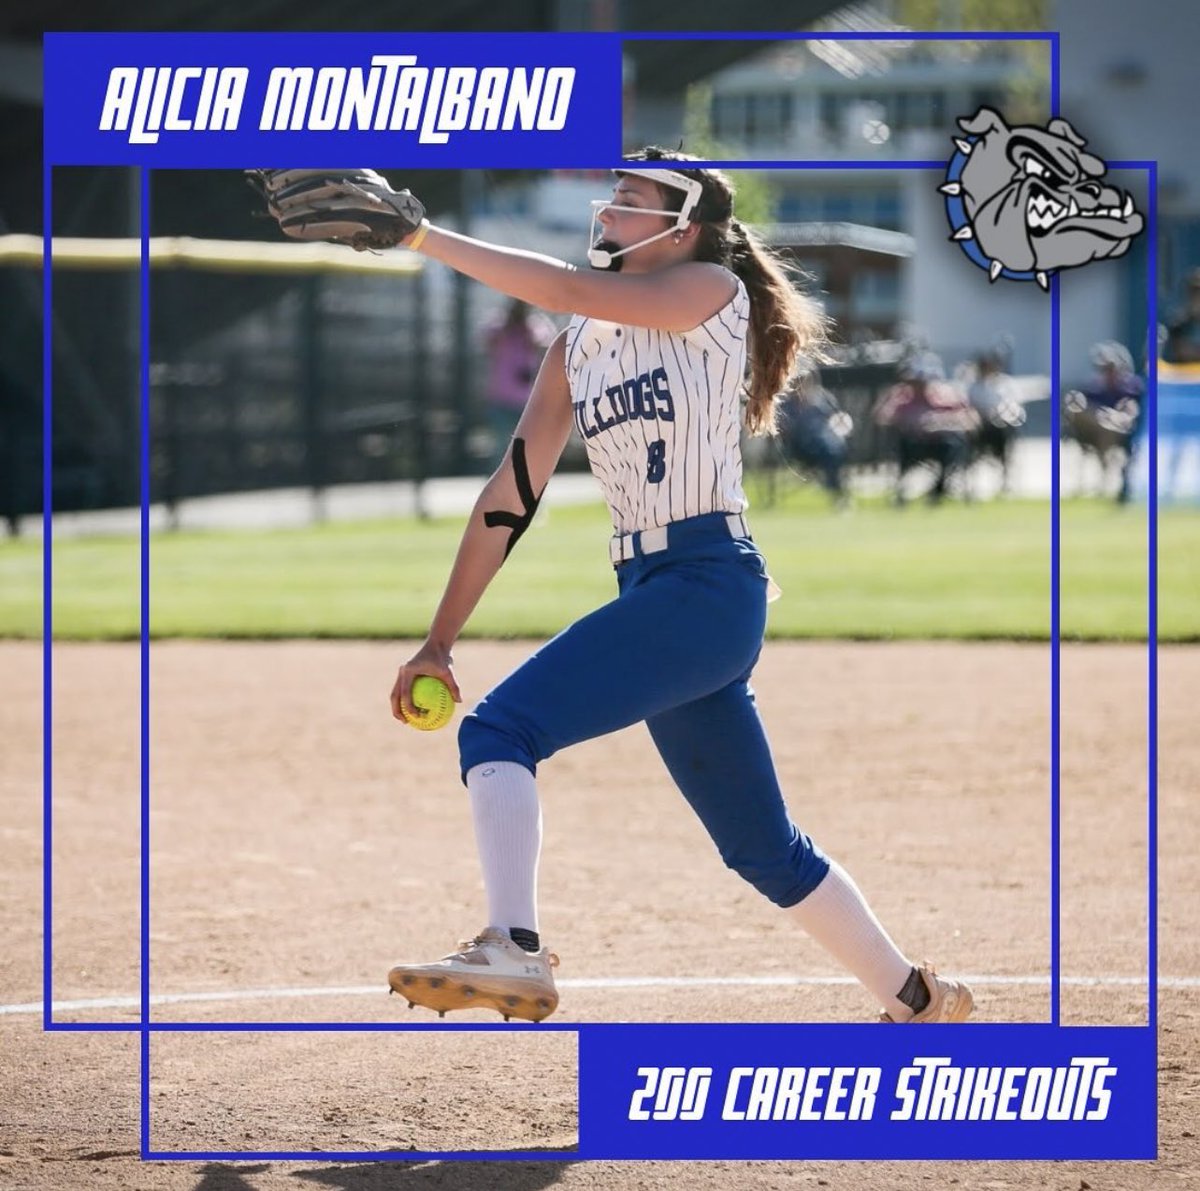 CONGRATULATIONS to our Sophomore Pitcher, Alicia Montalbano, on reaching over 200 Career Strikeouts during her no-hitter this past Tuesday!👏🔥 Way 2 keep us rolling today in our 1st round GMC Win over Colonia, adding another 10 K’s!💪🙌 @Alicia_Softball #metuchensoftball 🐾🥎💙